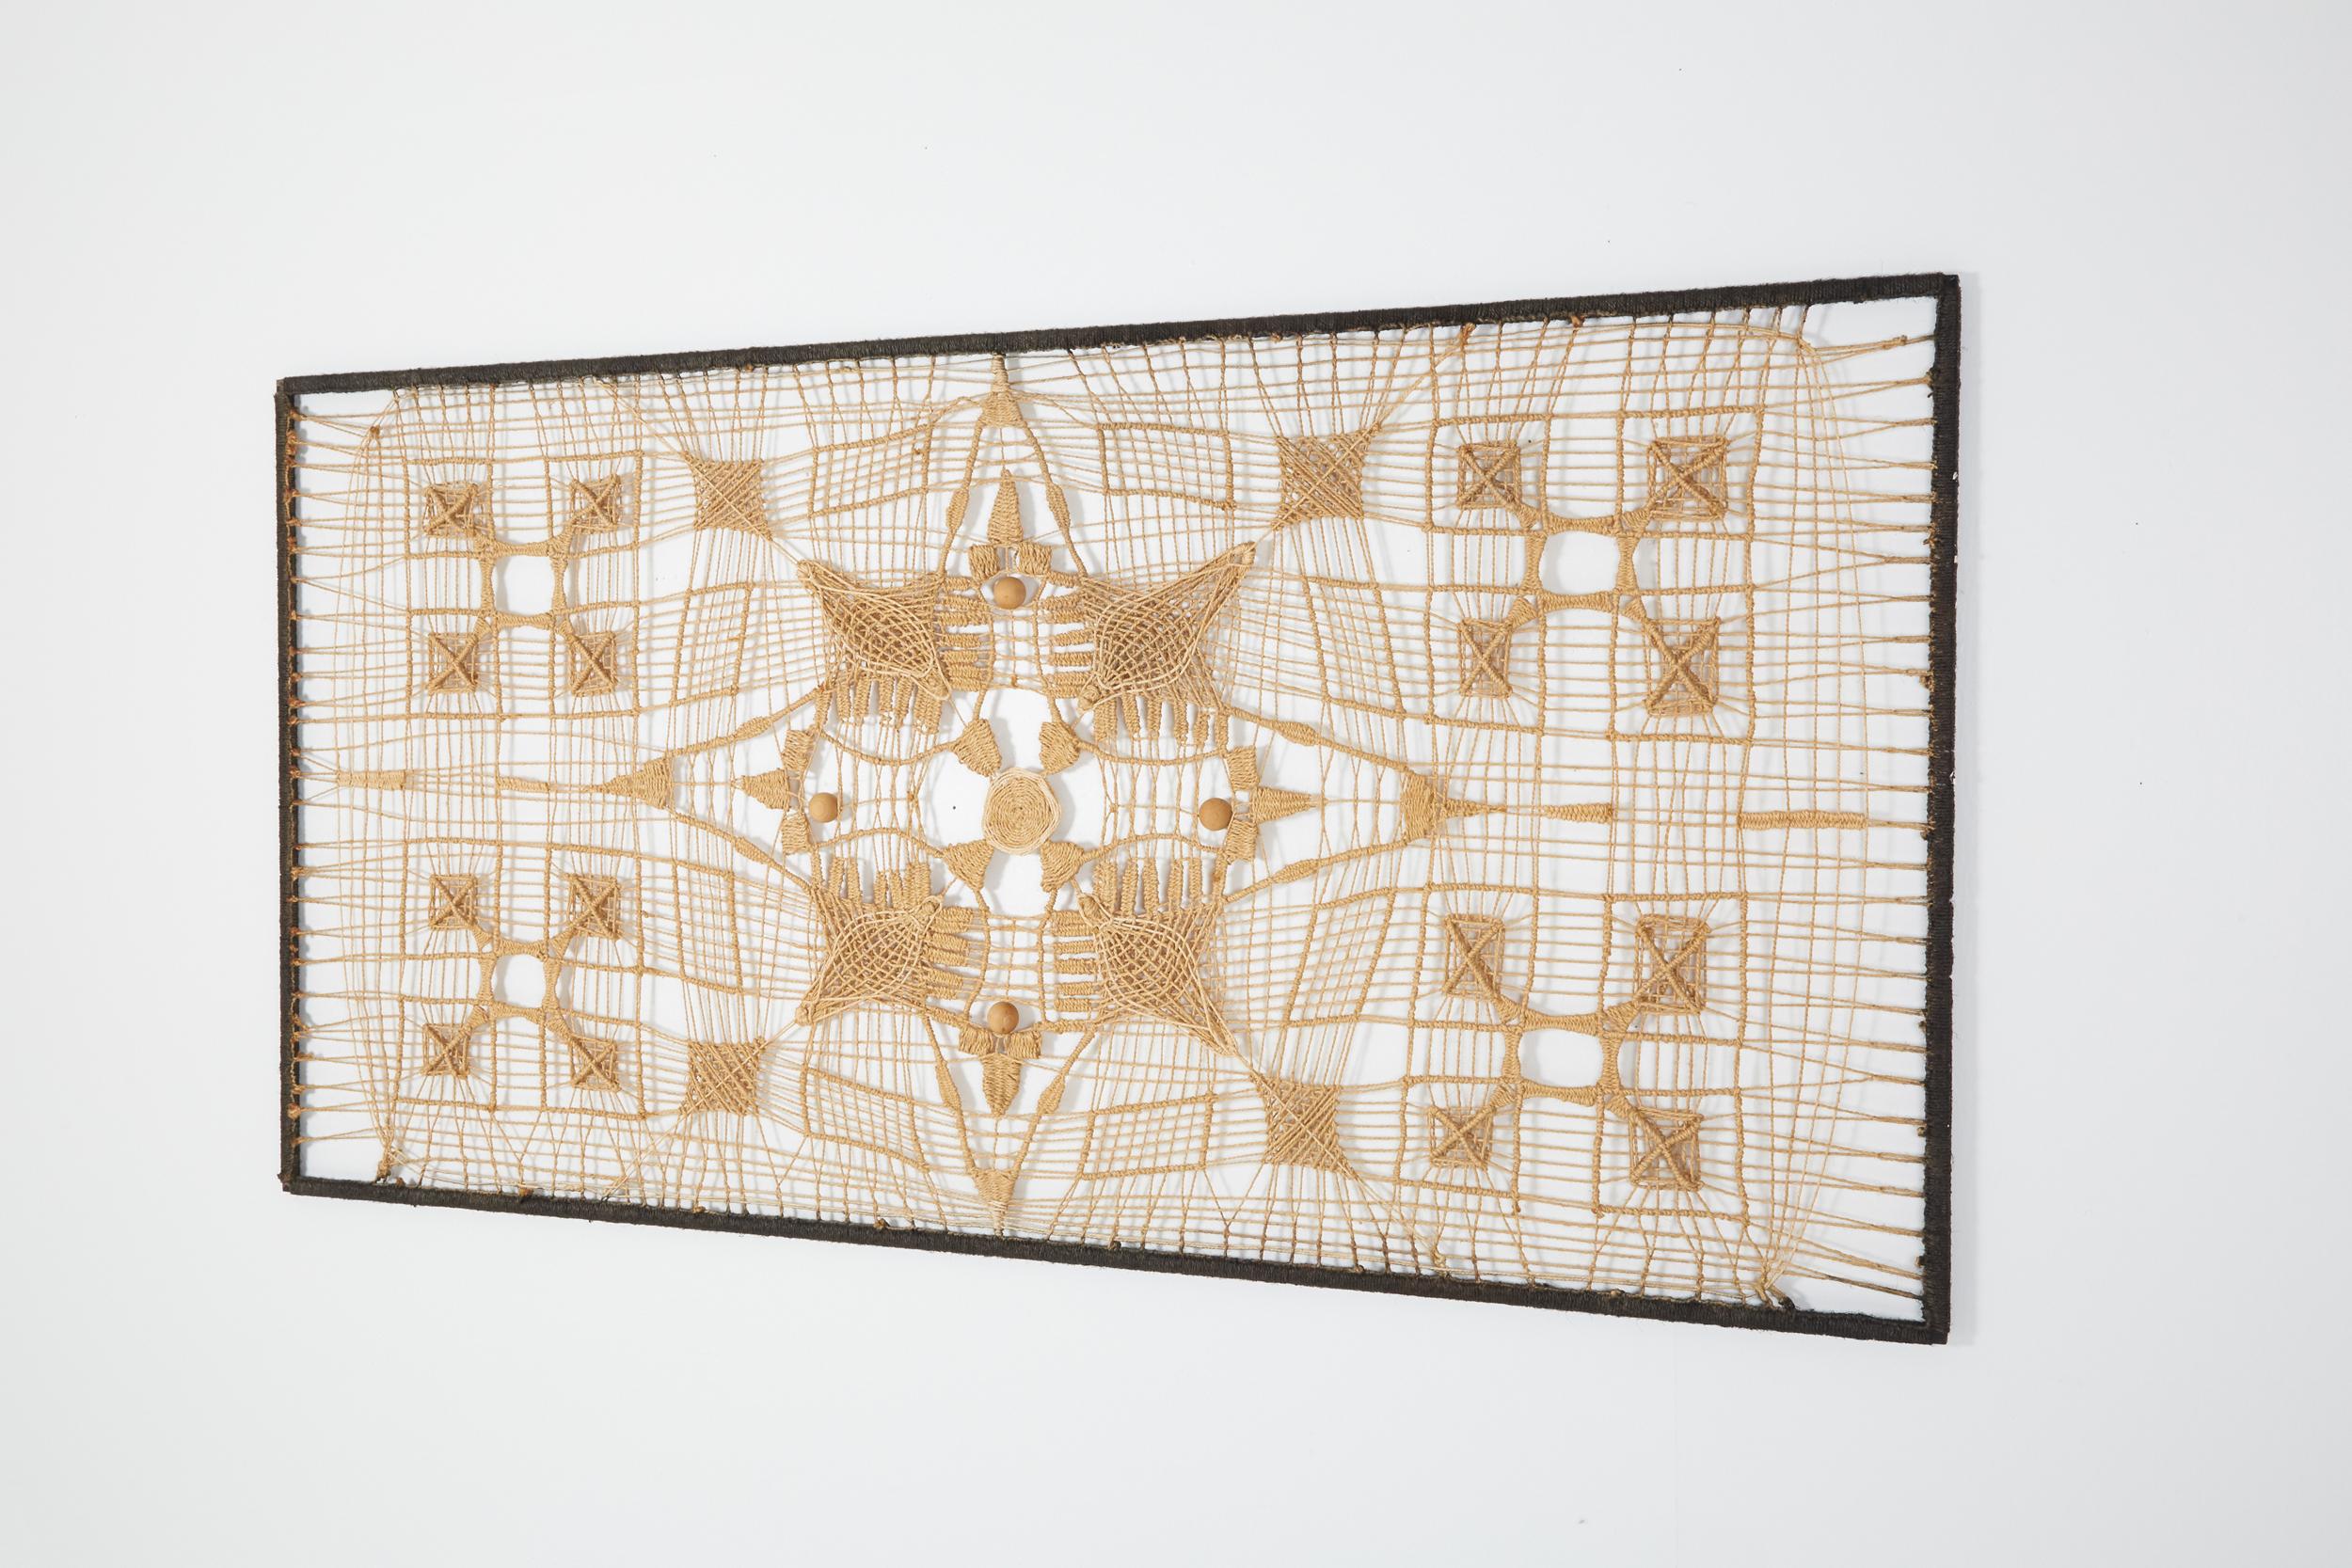 Woven; Wall piece; Artwork; Mid-Century Modern; Tapestries; Contemporary Art; Craftsman

This Hand-woven wall piece is a true conversation piece. The depth is created by layering different patterns on top of each other in a frame. The wall behind